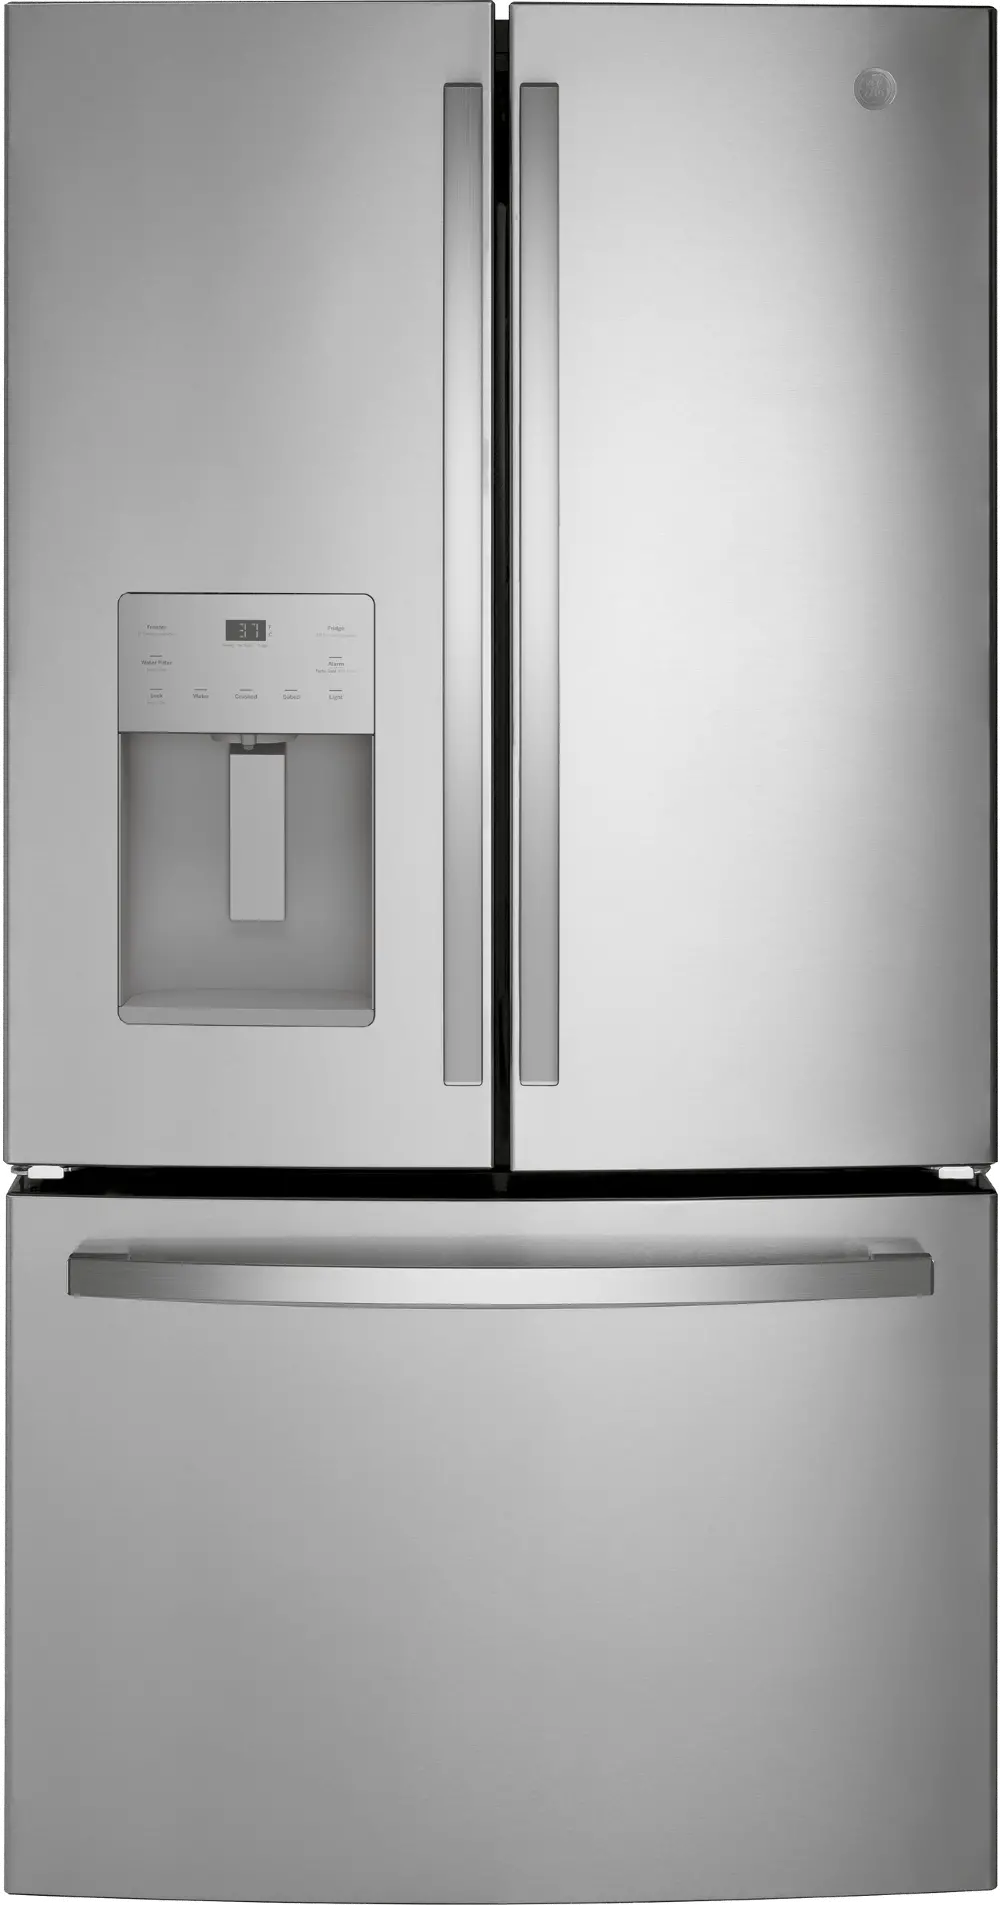 GFE26JYMFS-PROJECT GE 25.6 cu ft French Door Refrigerator - Stainless Steel-1